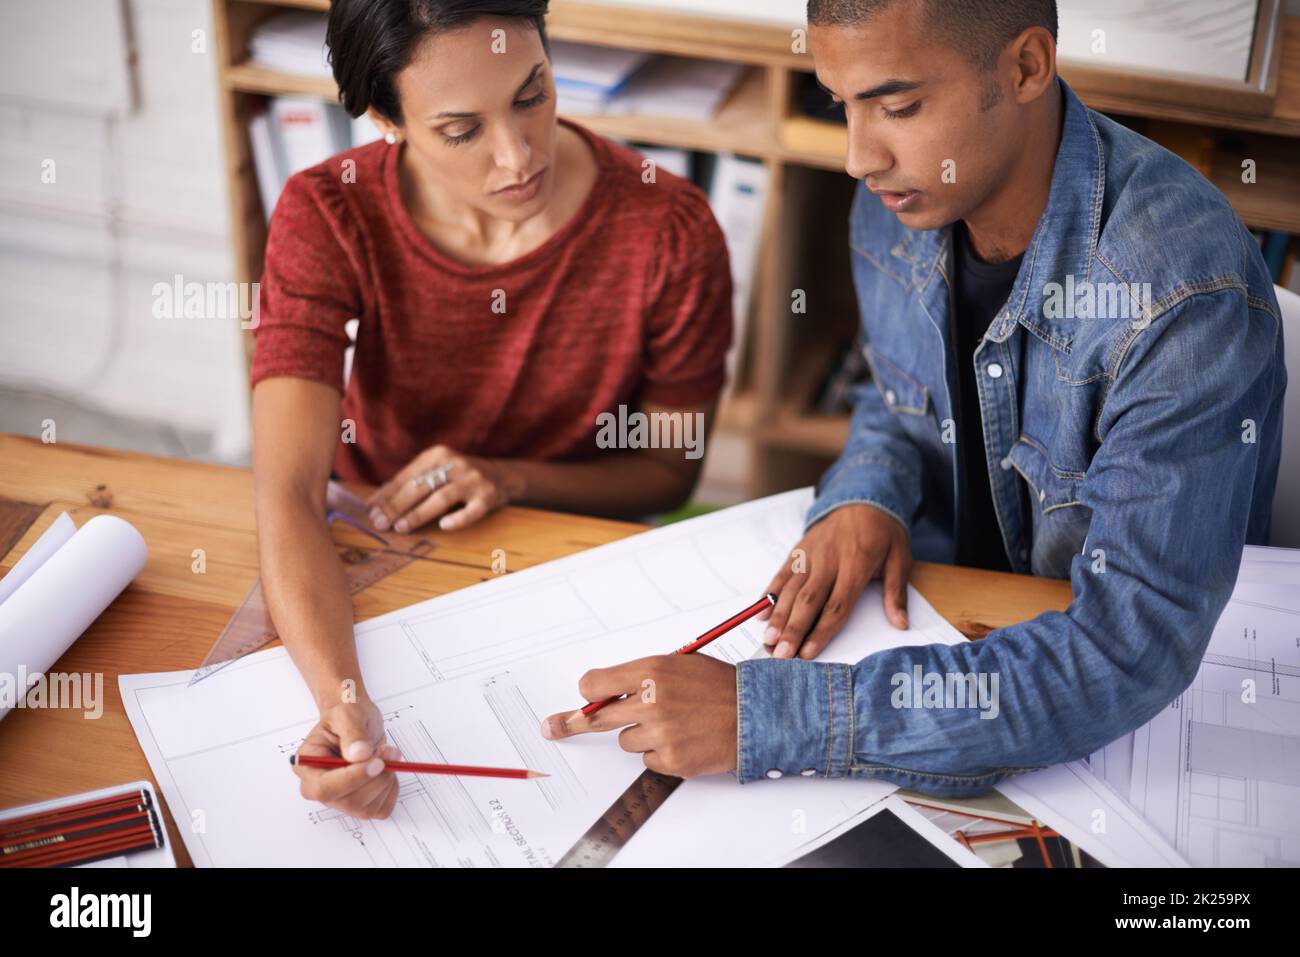 Ensuring quality in their design. two young designers working together in an office. Stock Photo